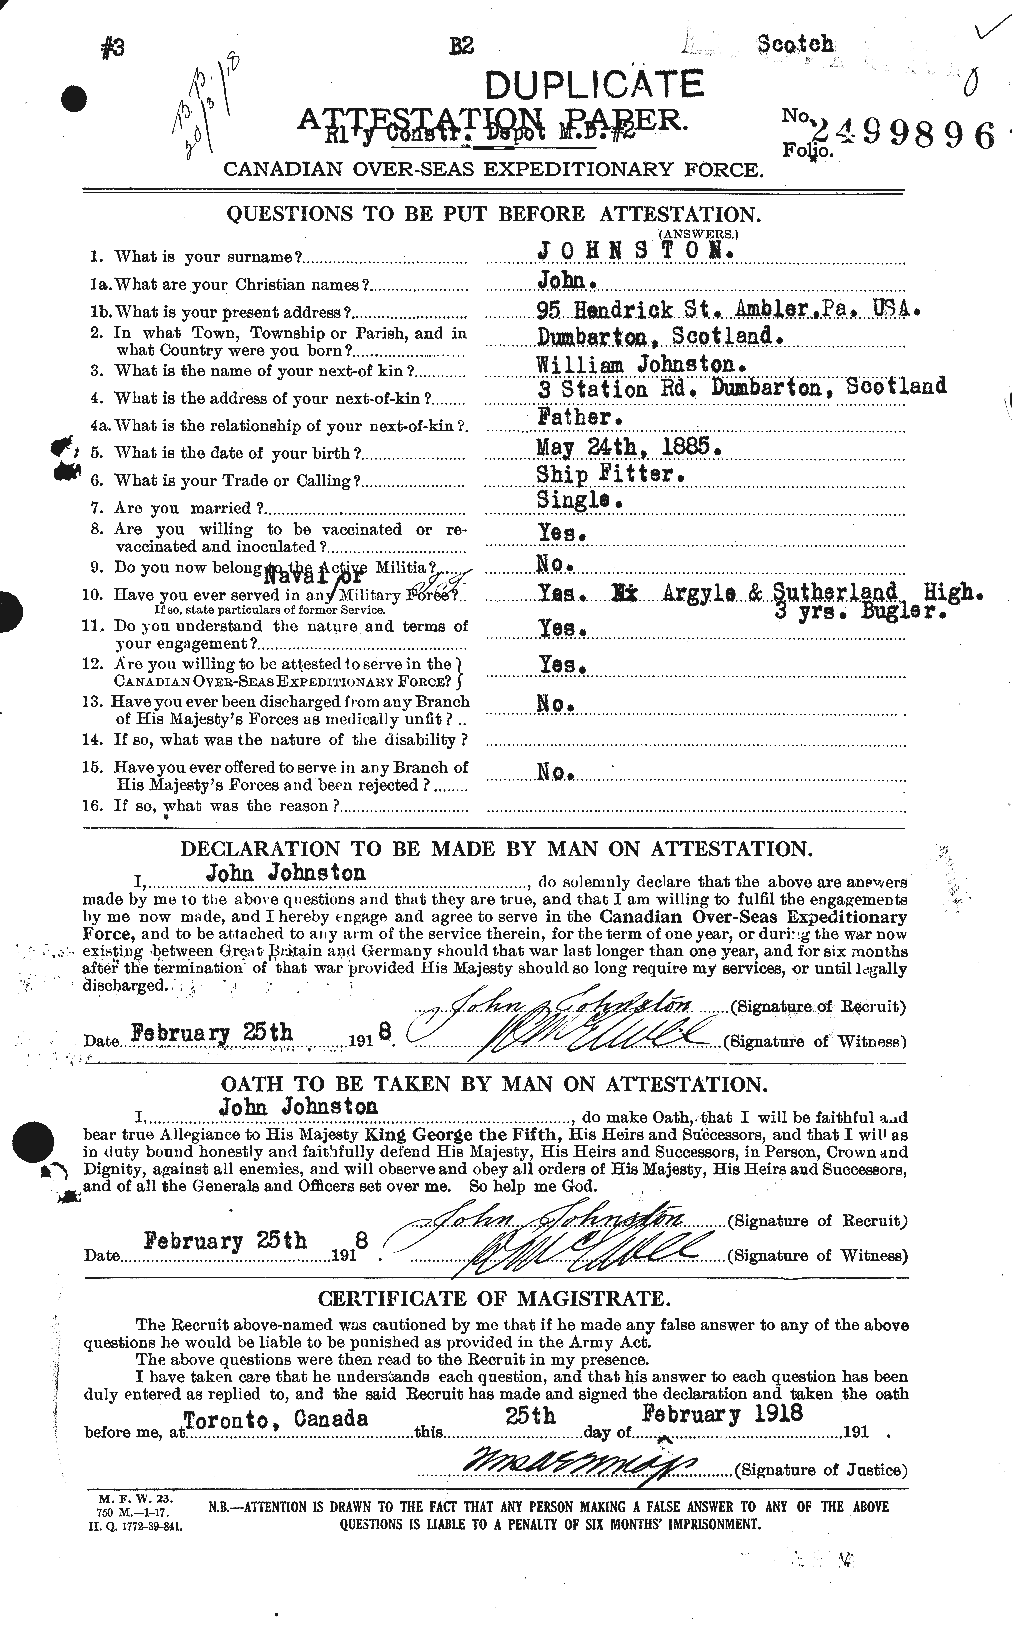 Personnel Records of the First World War - CEF 422794a